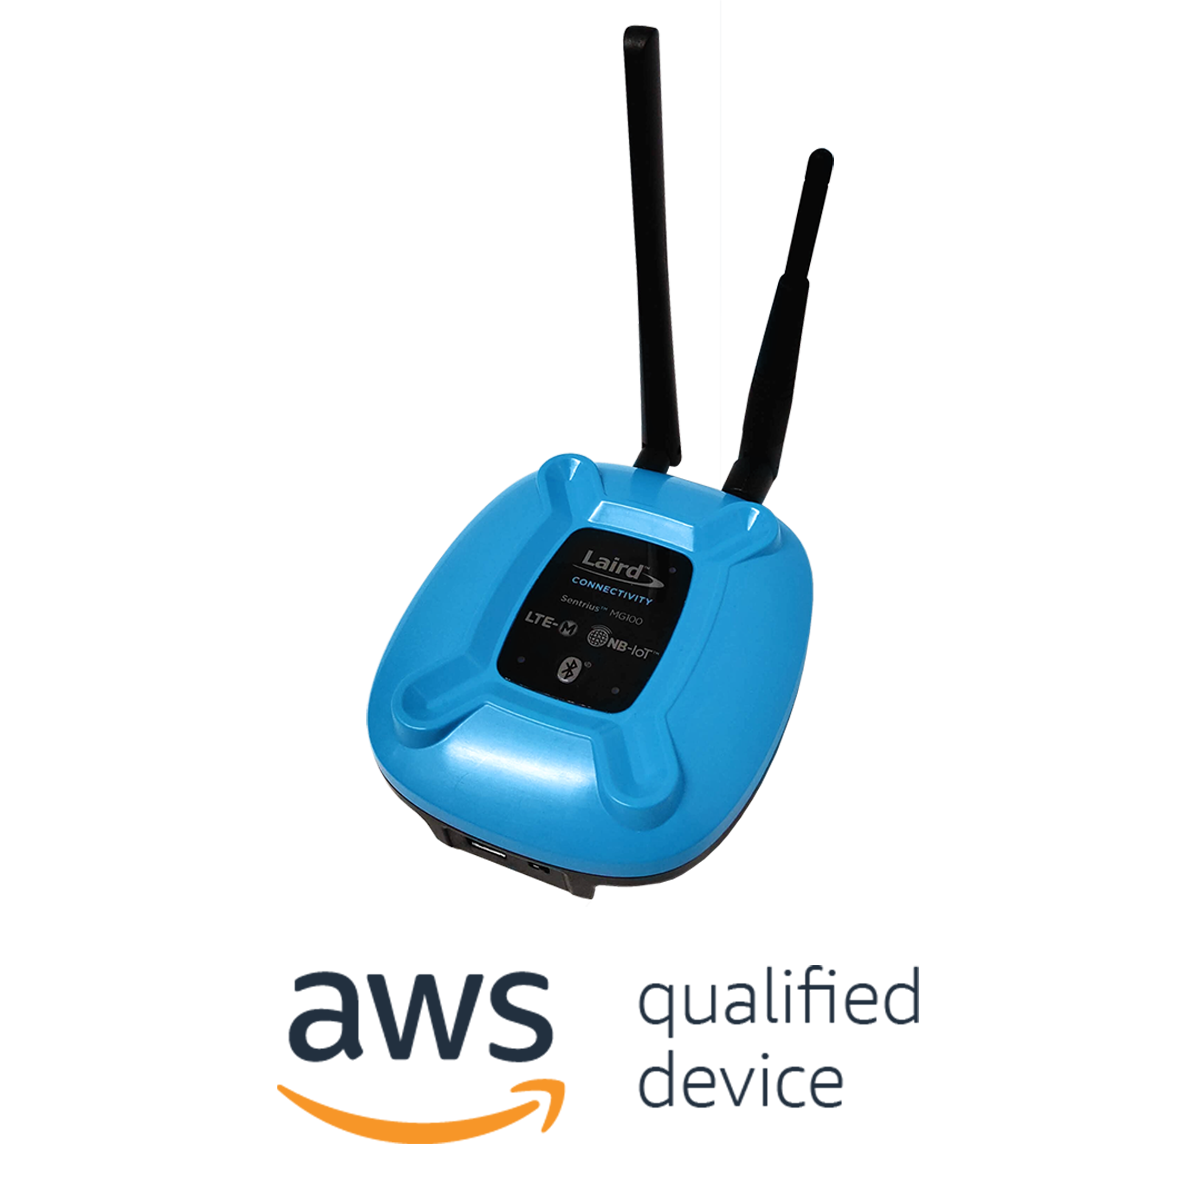 Our Sentrius™ MG100 Gateway – Now an AWS Qualified Device!